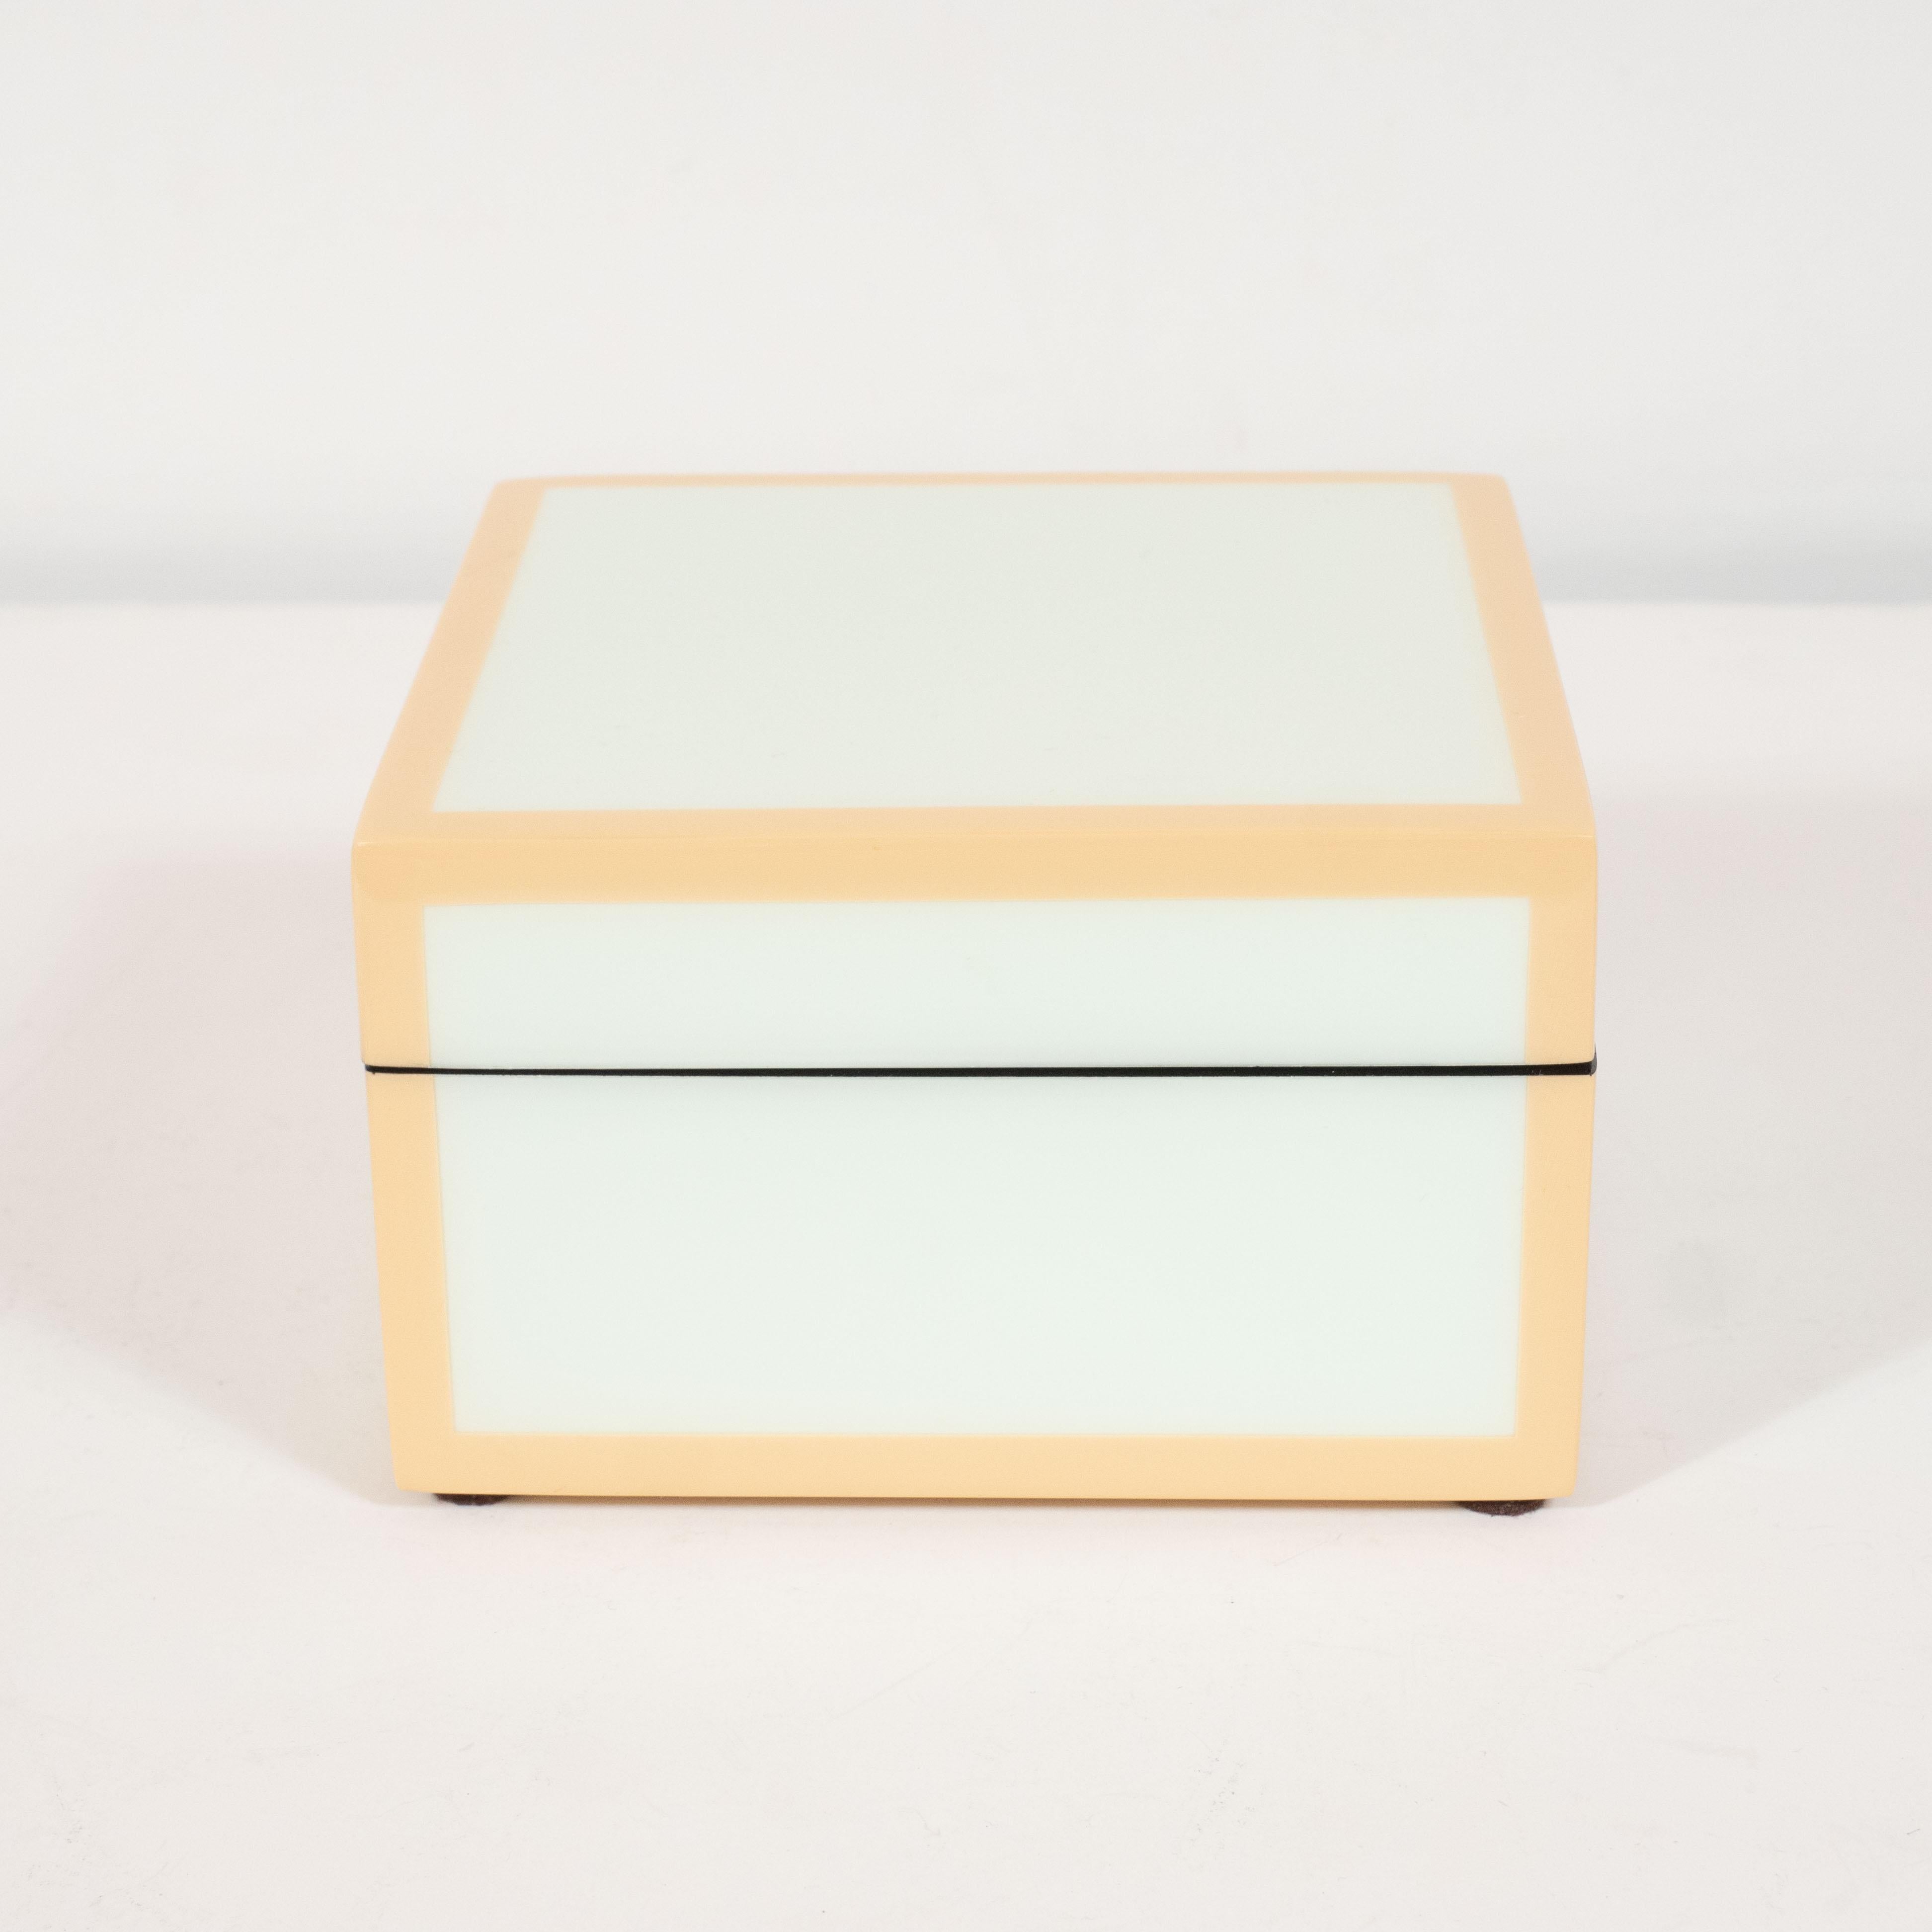 Philippine Modernist Square Lacquered Square Box in Pale Celadon with Tan Accents